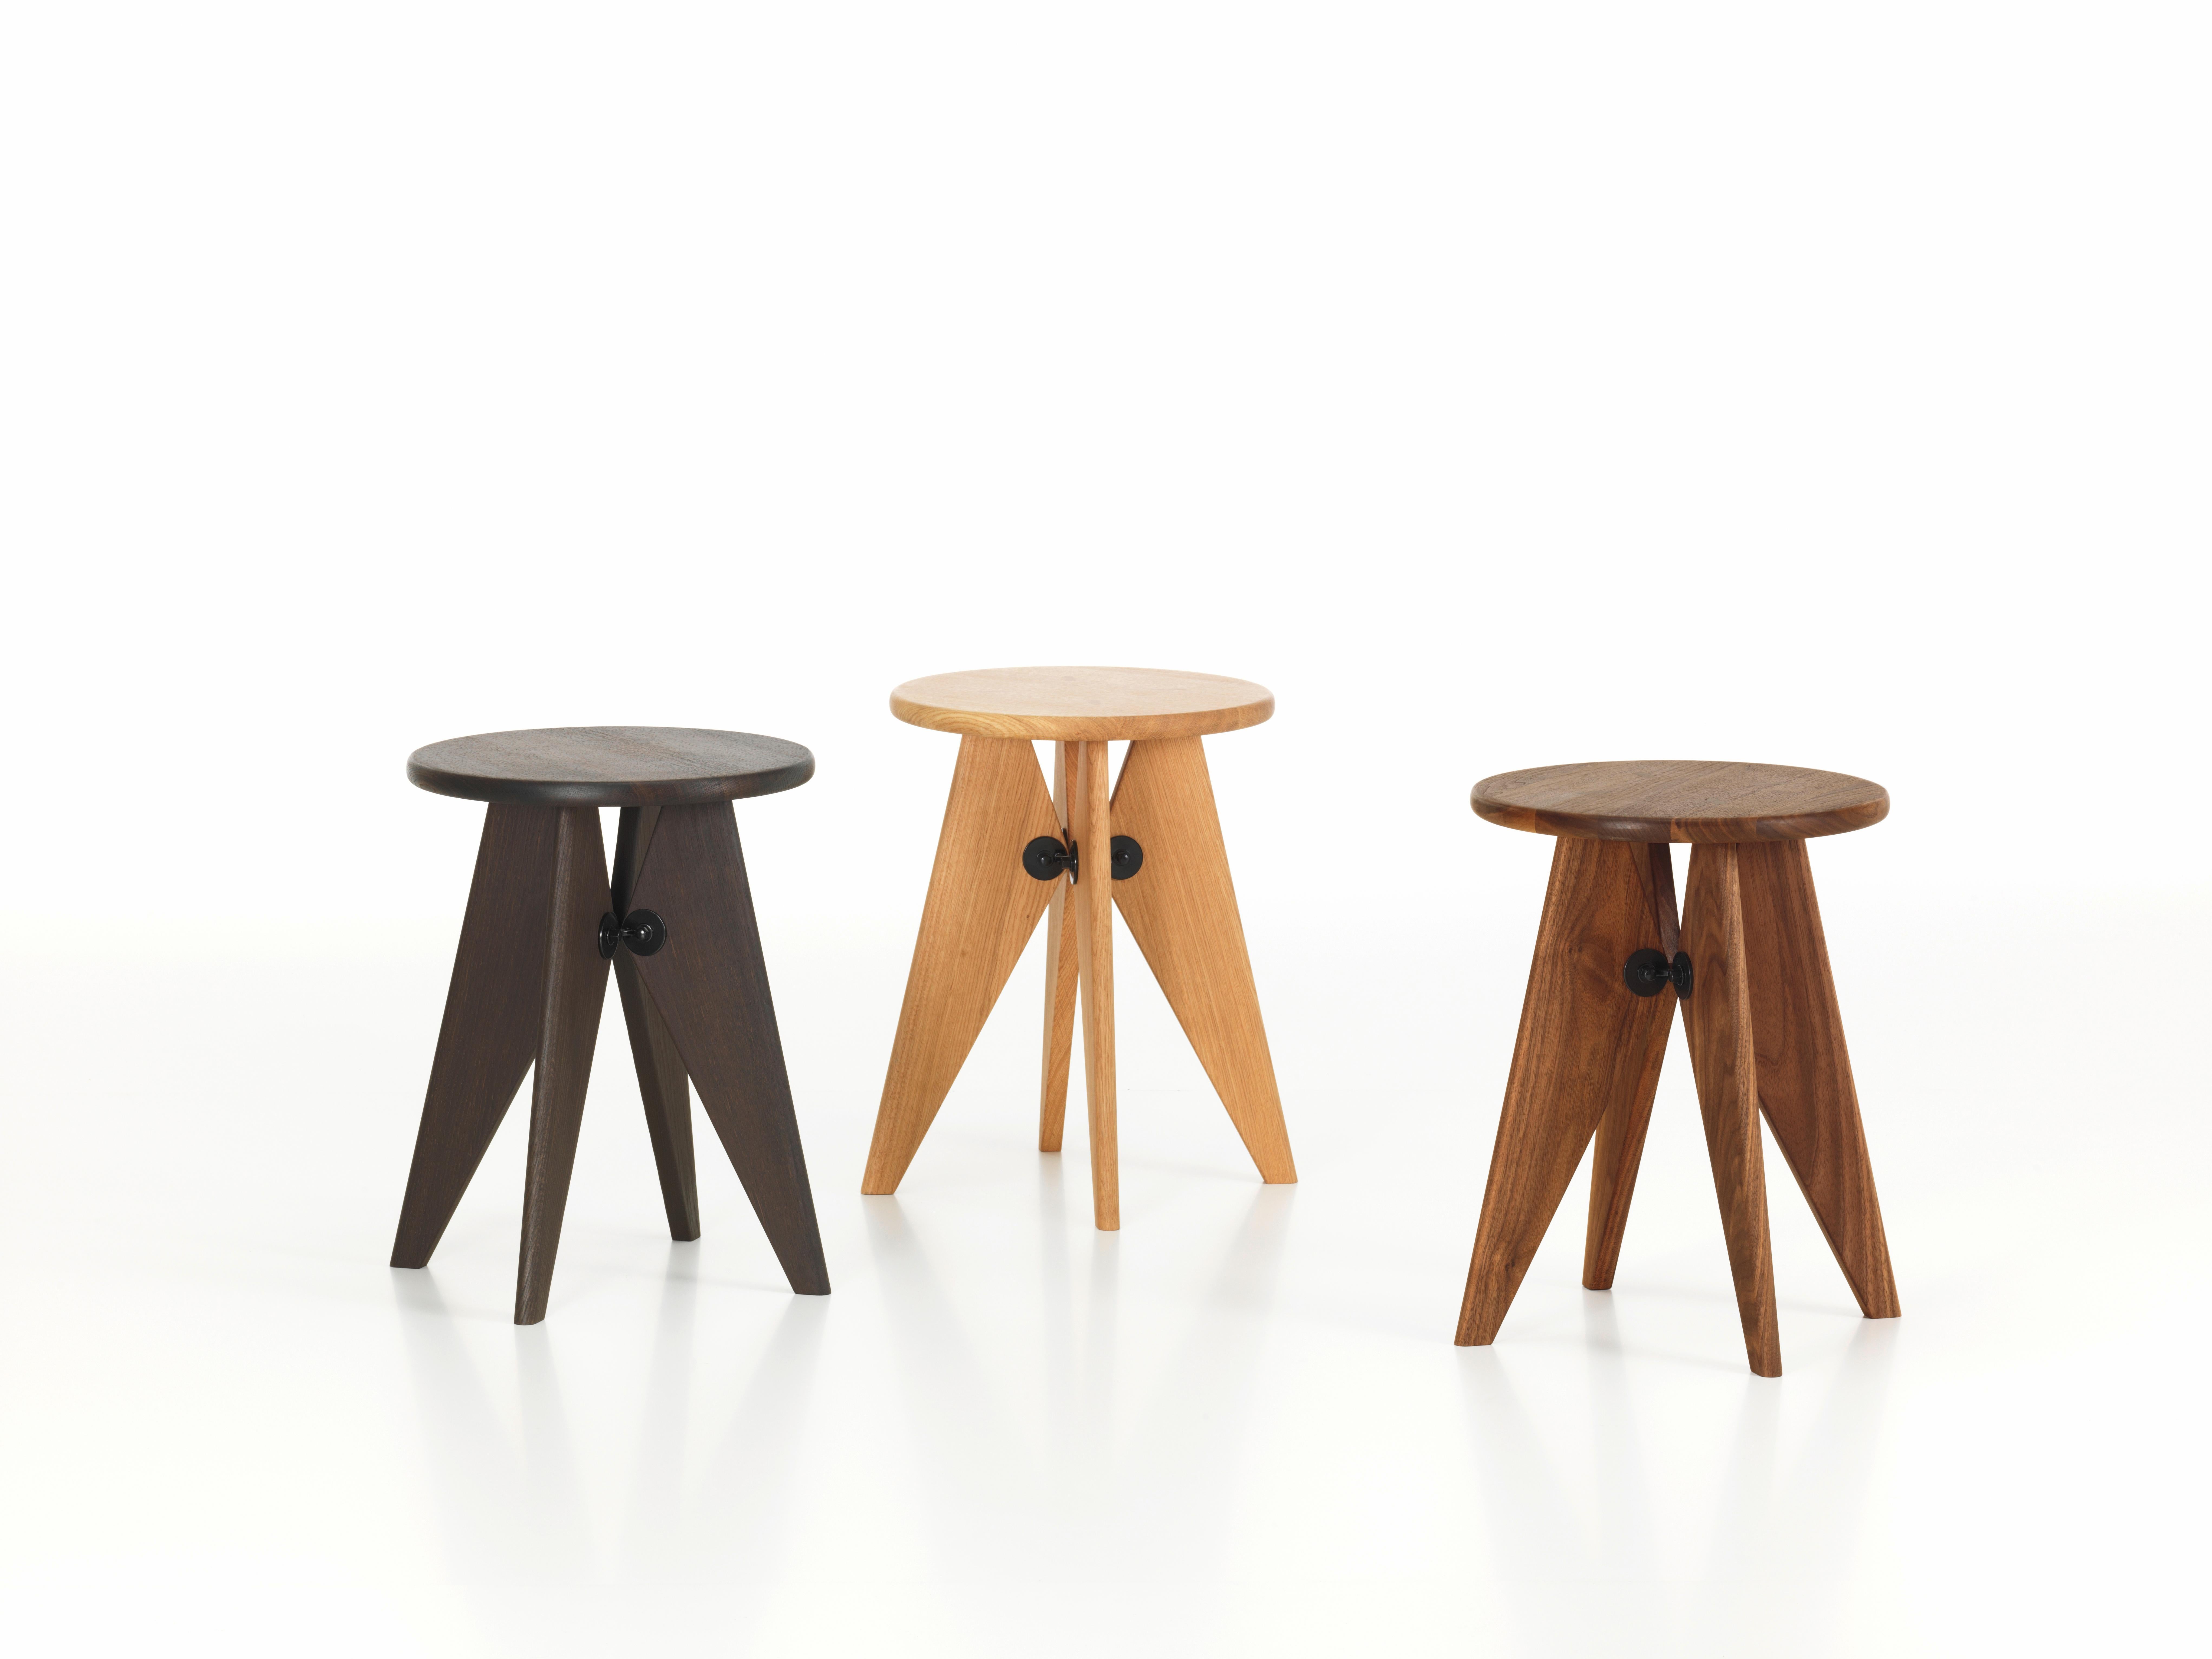 Tabouret Solvay is a simple, robust stool made of solid American walnut (or oak) that reveals the designer’s signature at first glance: its clear structural principles can be found throughout the work of Jean Prouvé. Thanks to the flat, even surface